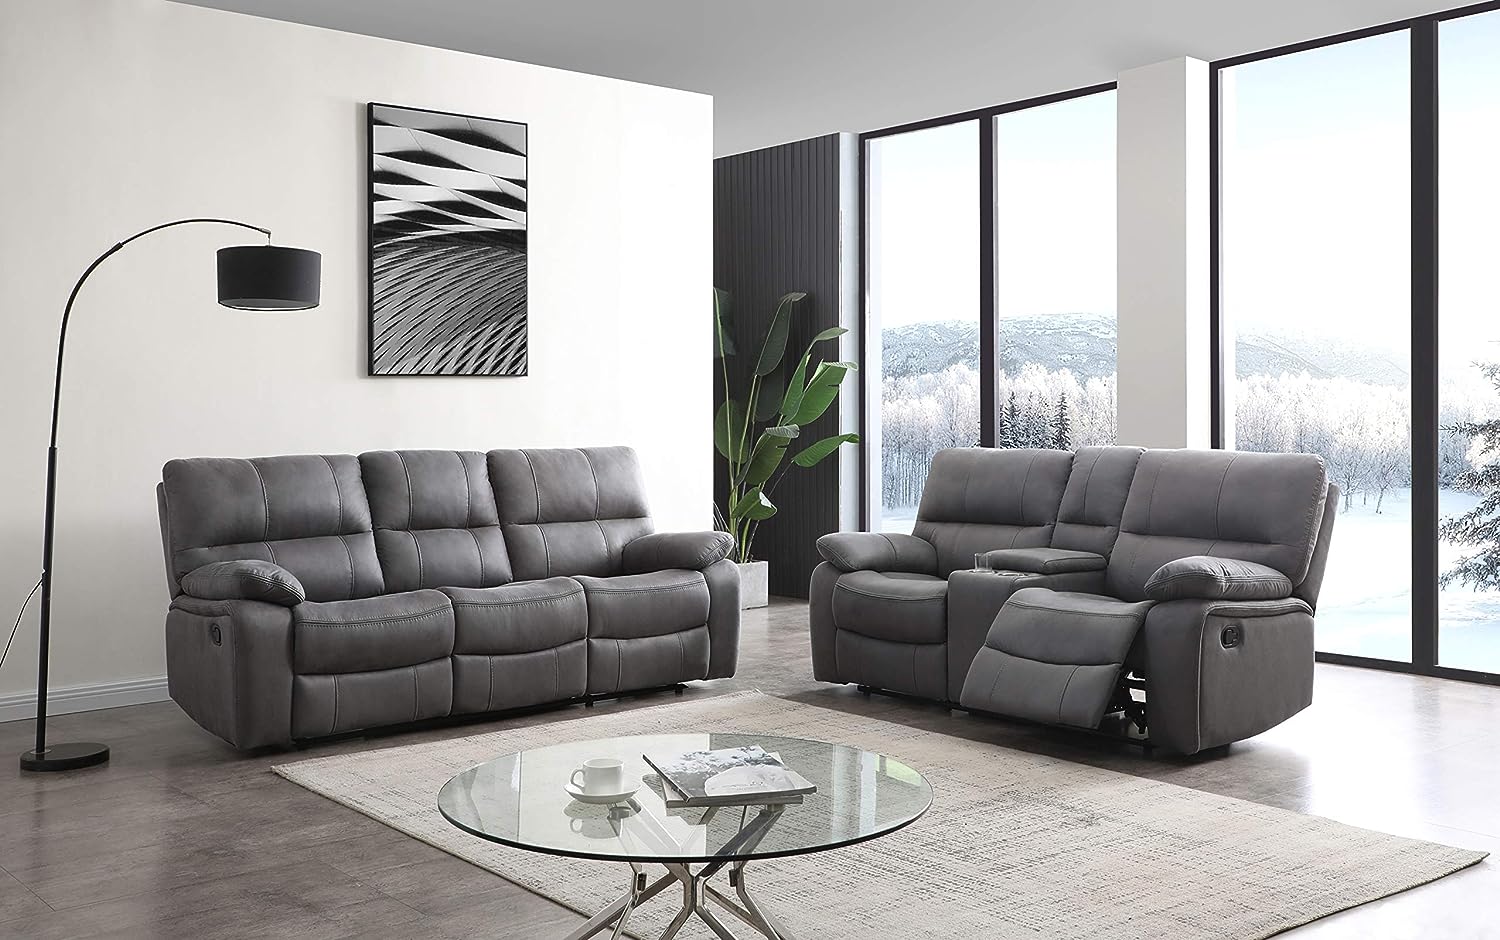 Betsy Furniture Microfiber Reclining Sofa Couch Set [...]